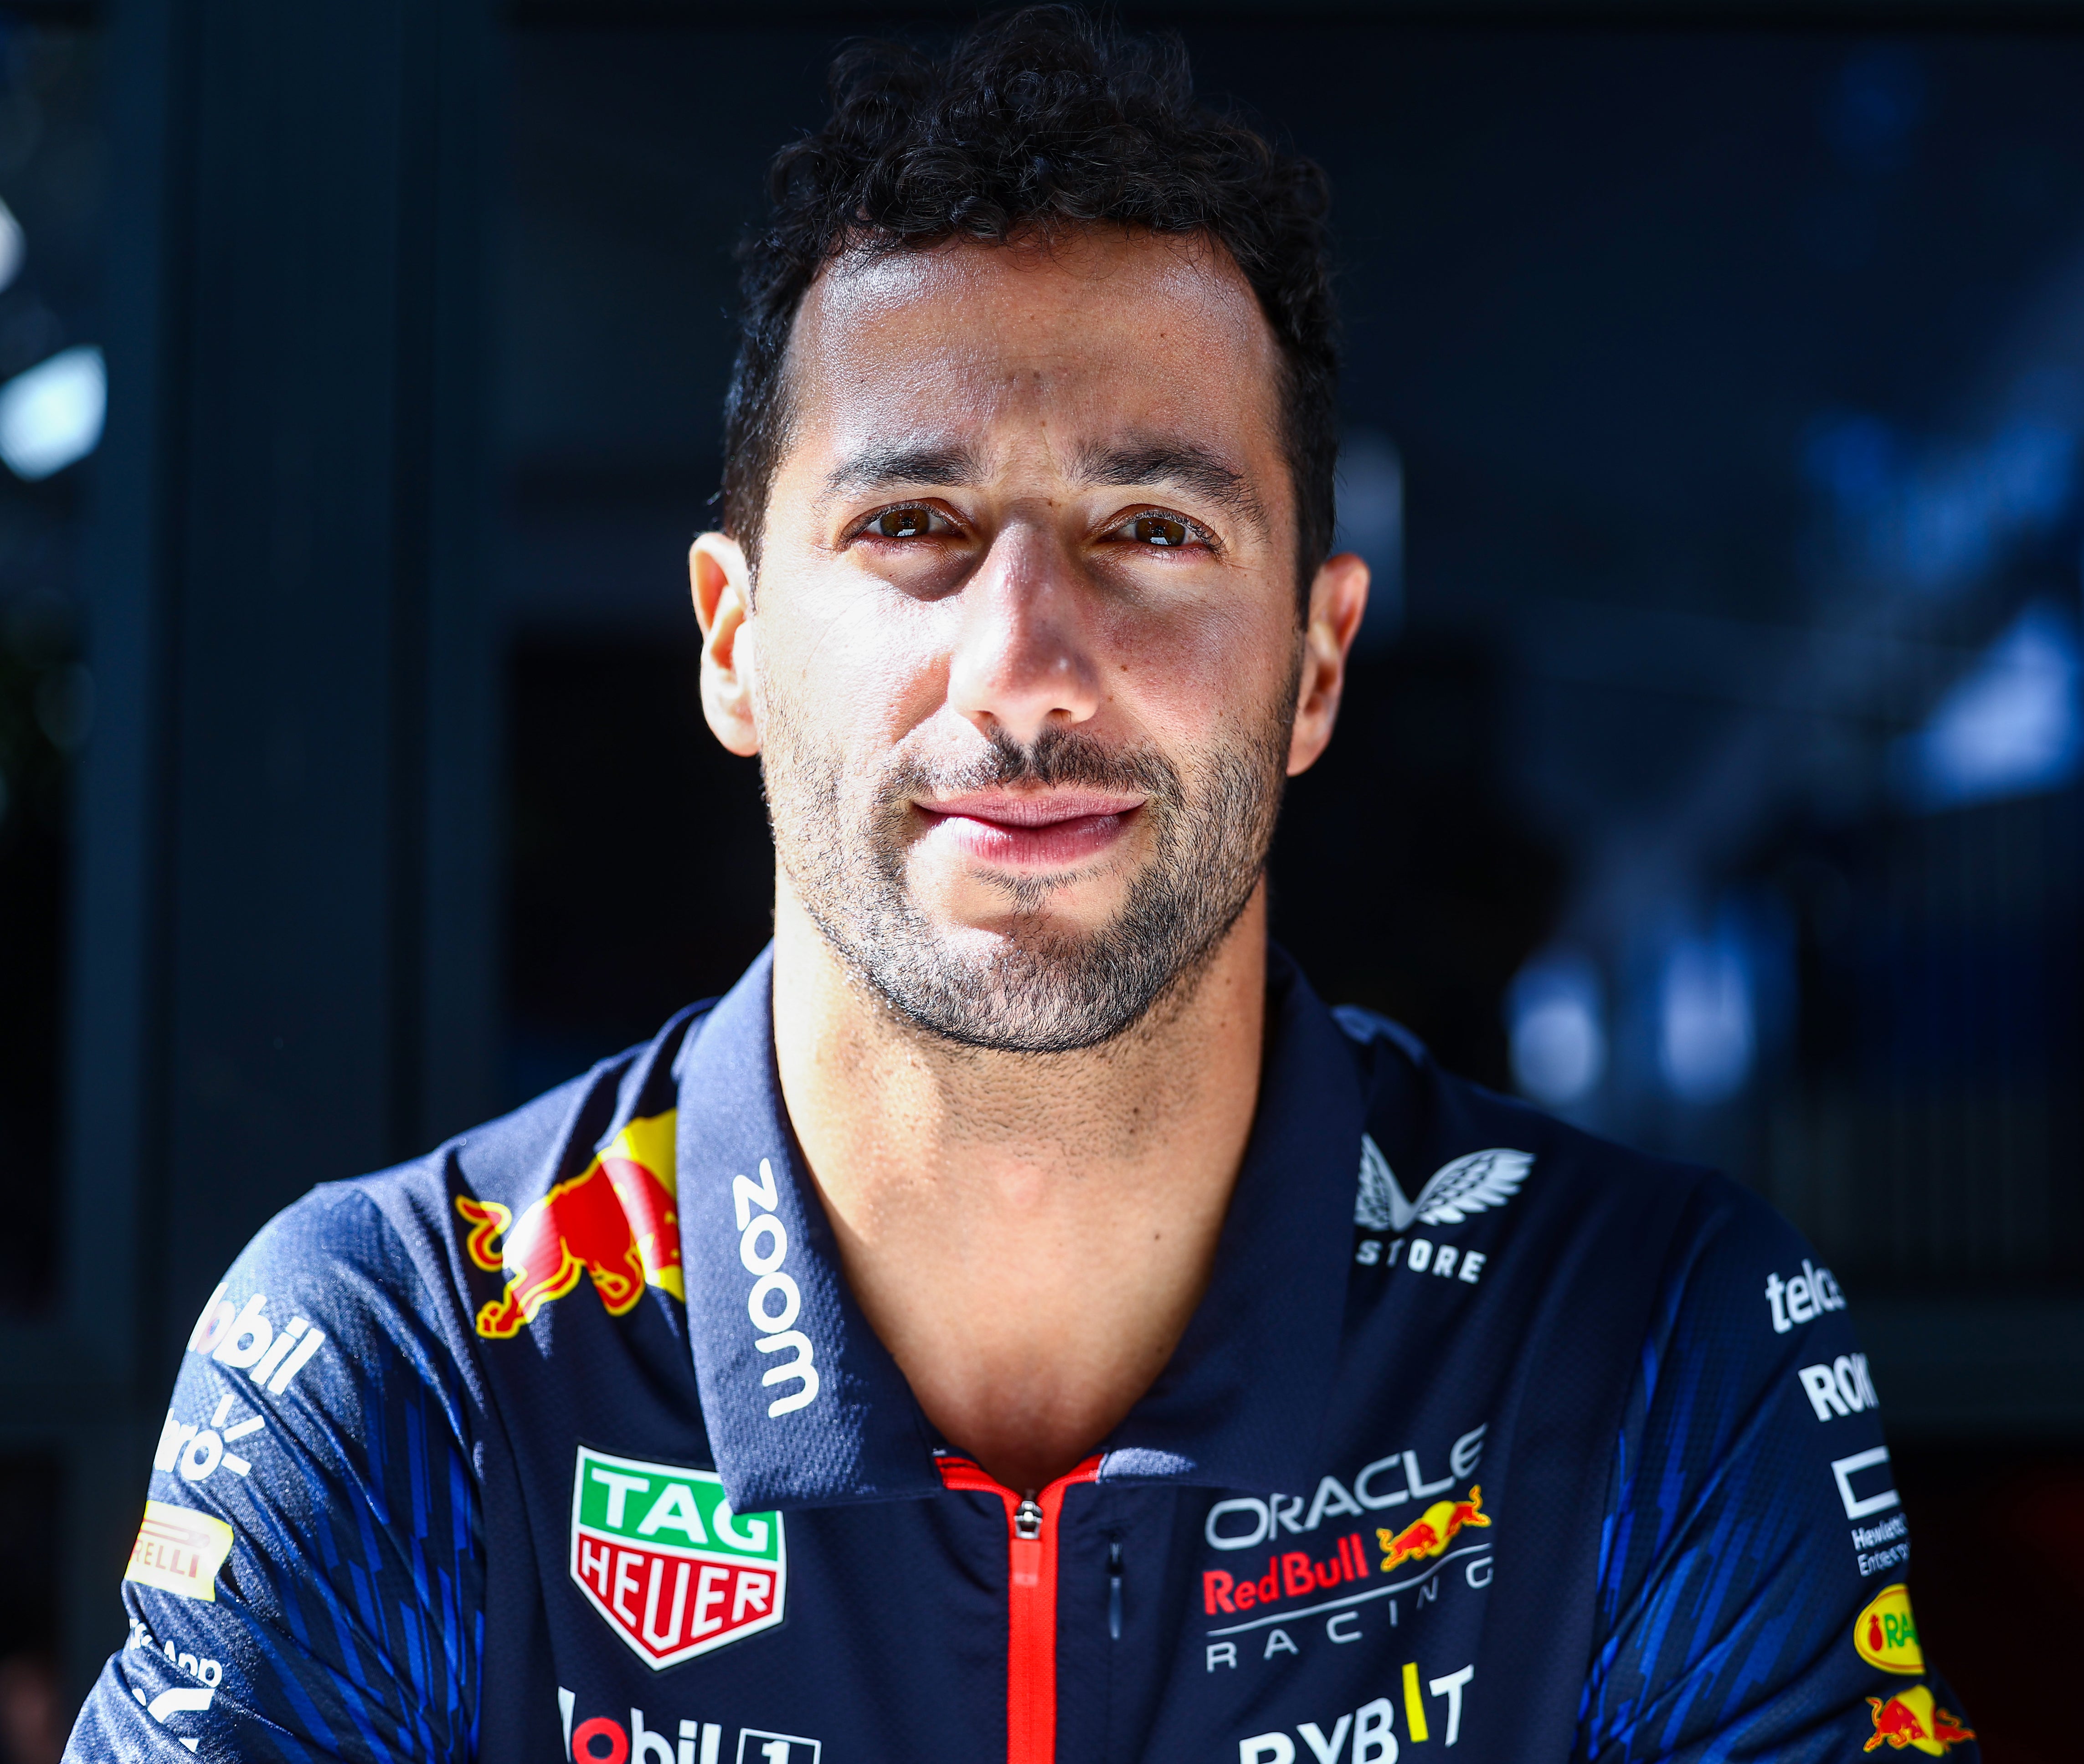 Daniel Ricciardo is back in Formula 1 – and he has more motivation than ever before